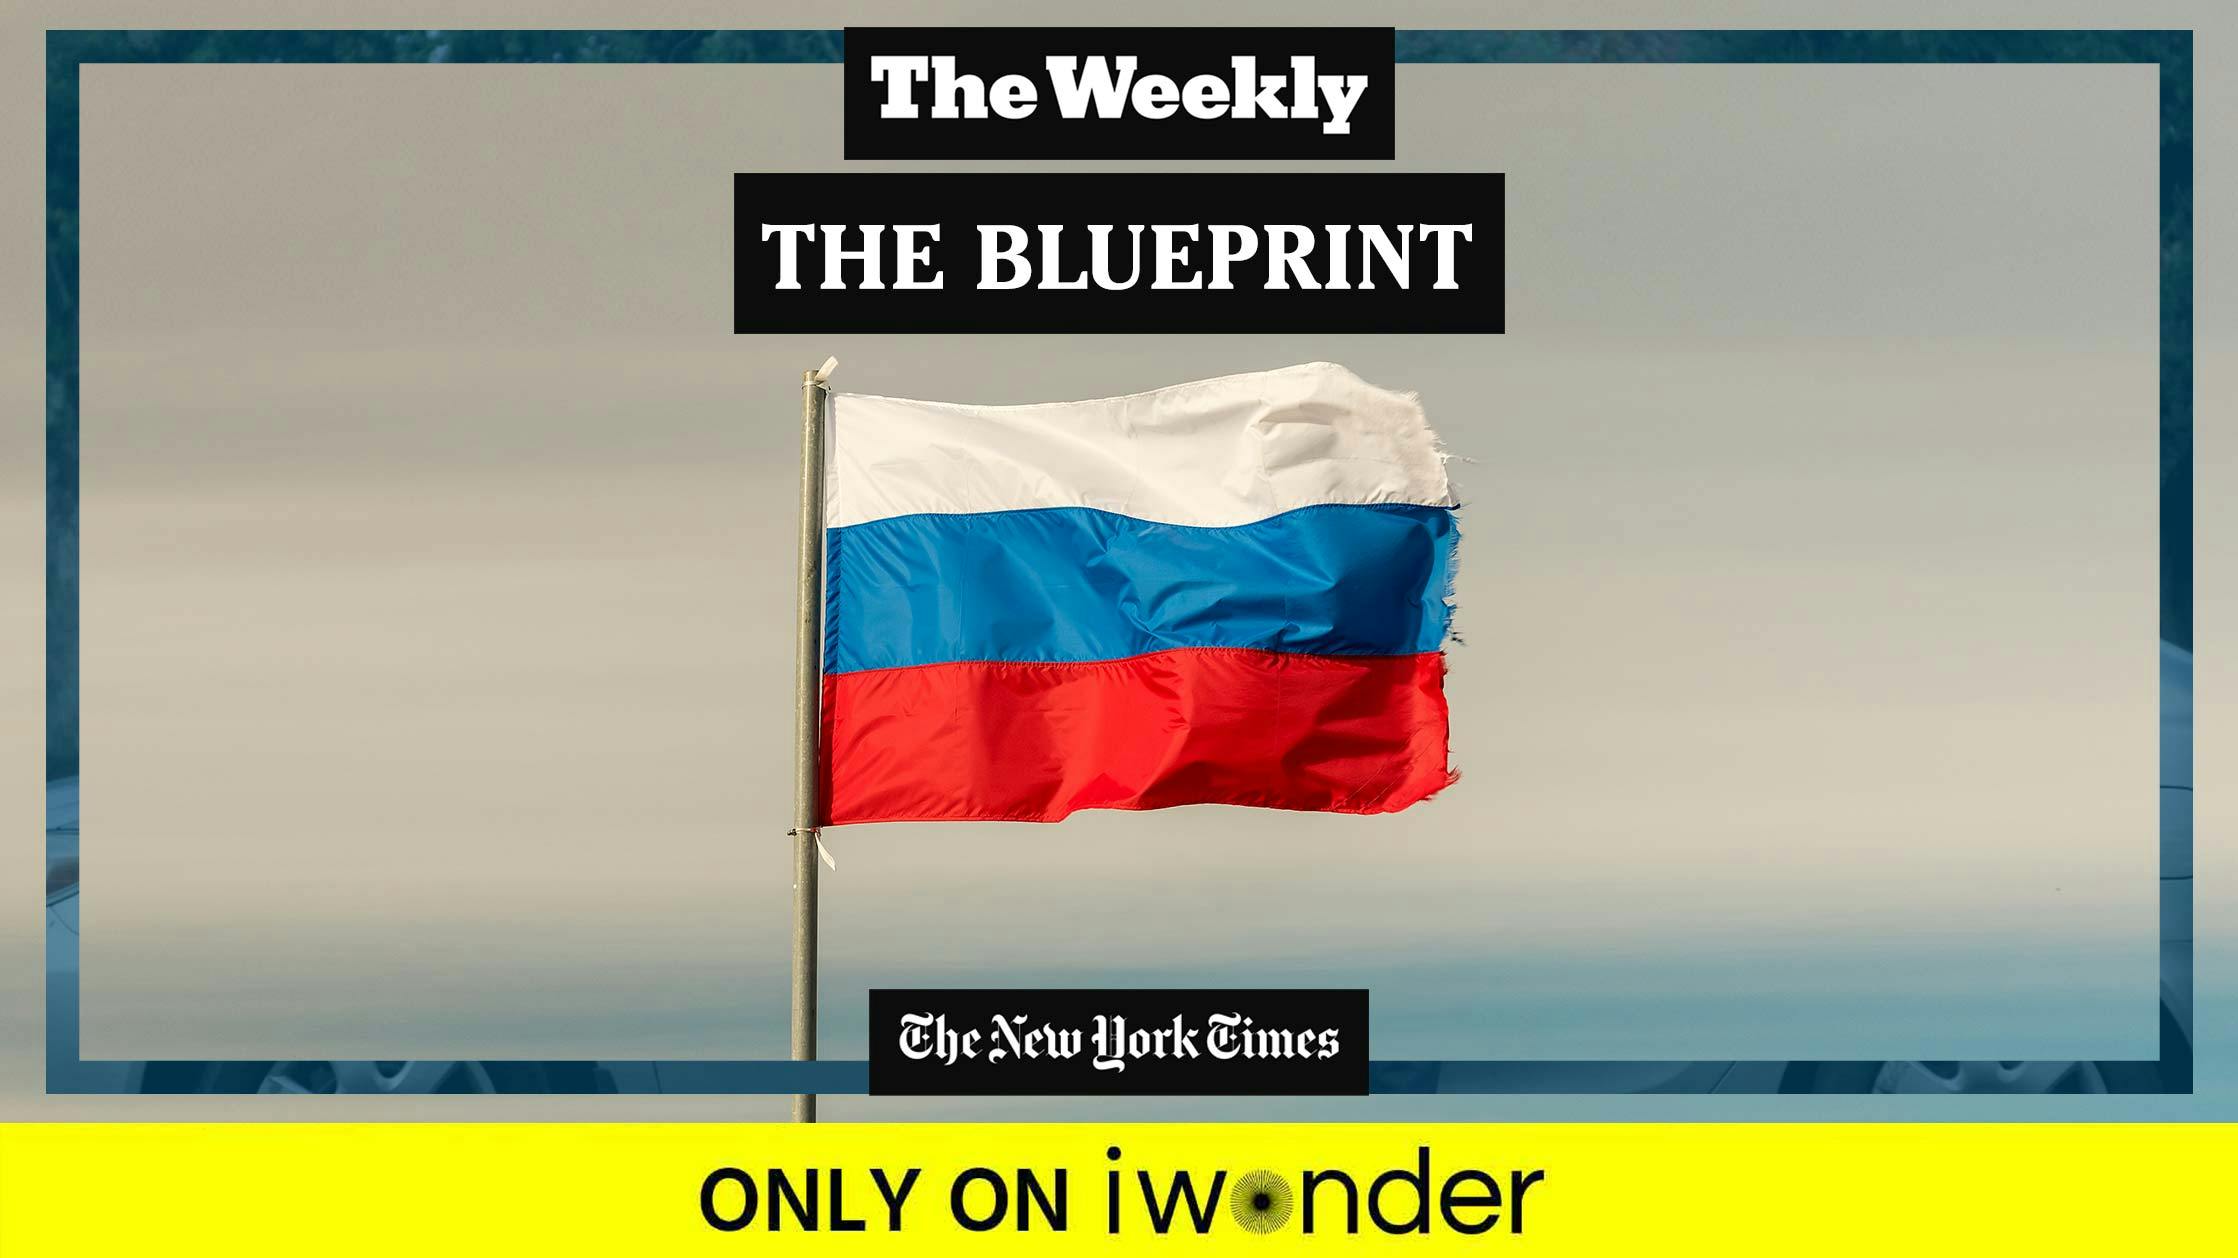 The Weekly: The Blueprint